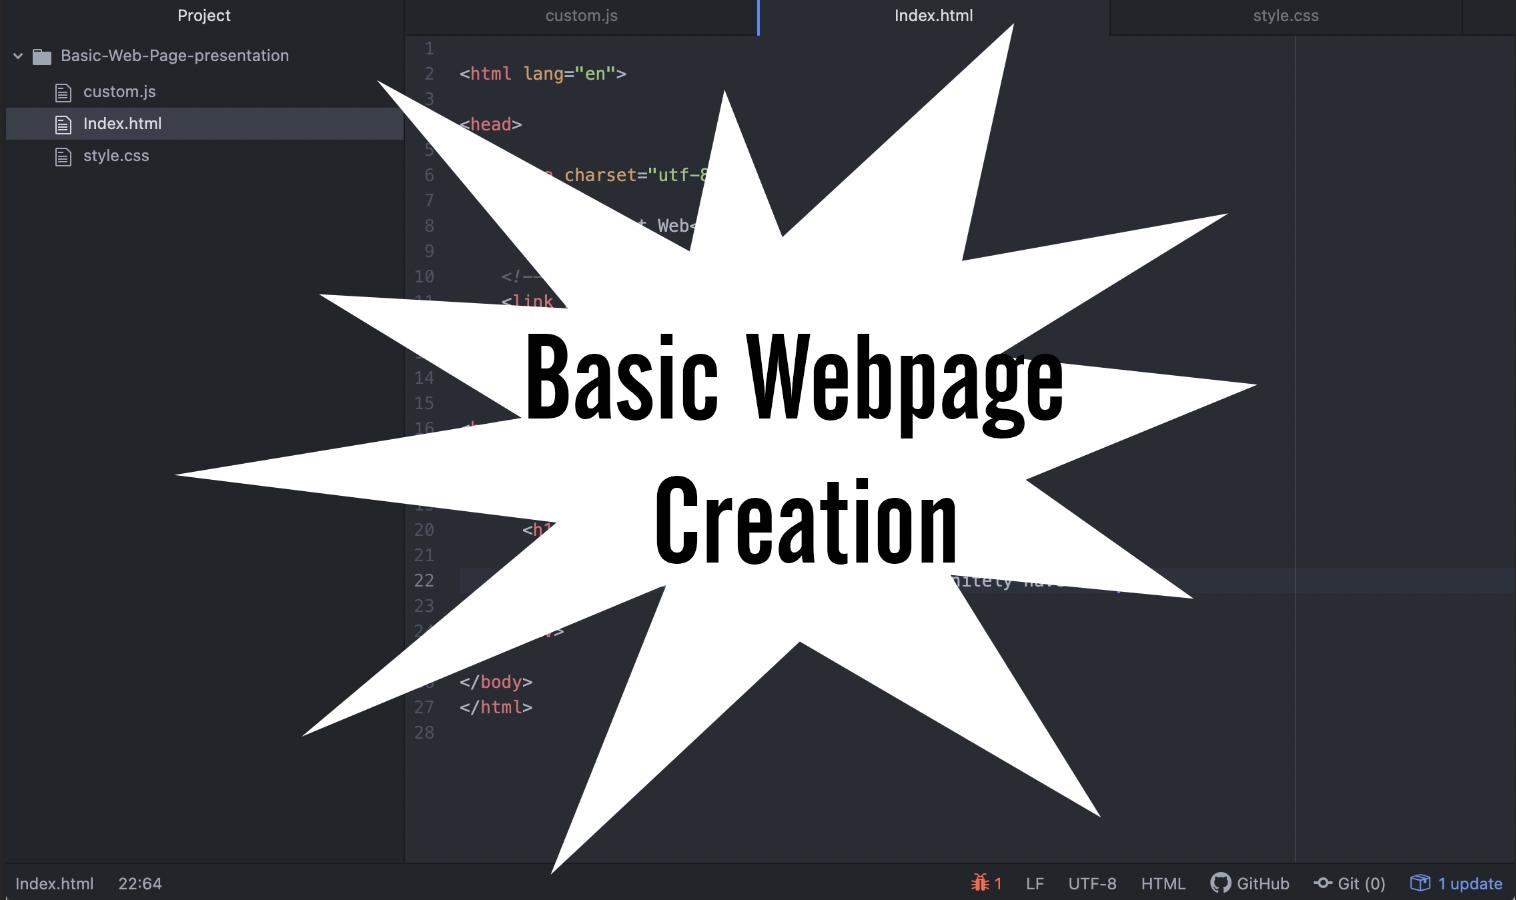 Code in background with the words 'Basic Web Page Creation' exploding out of the center